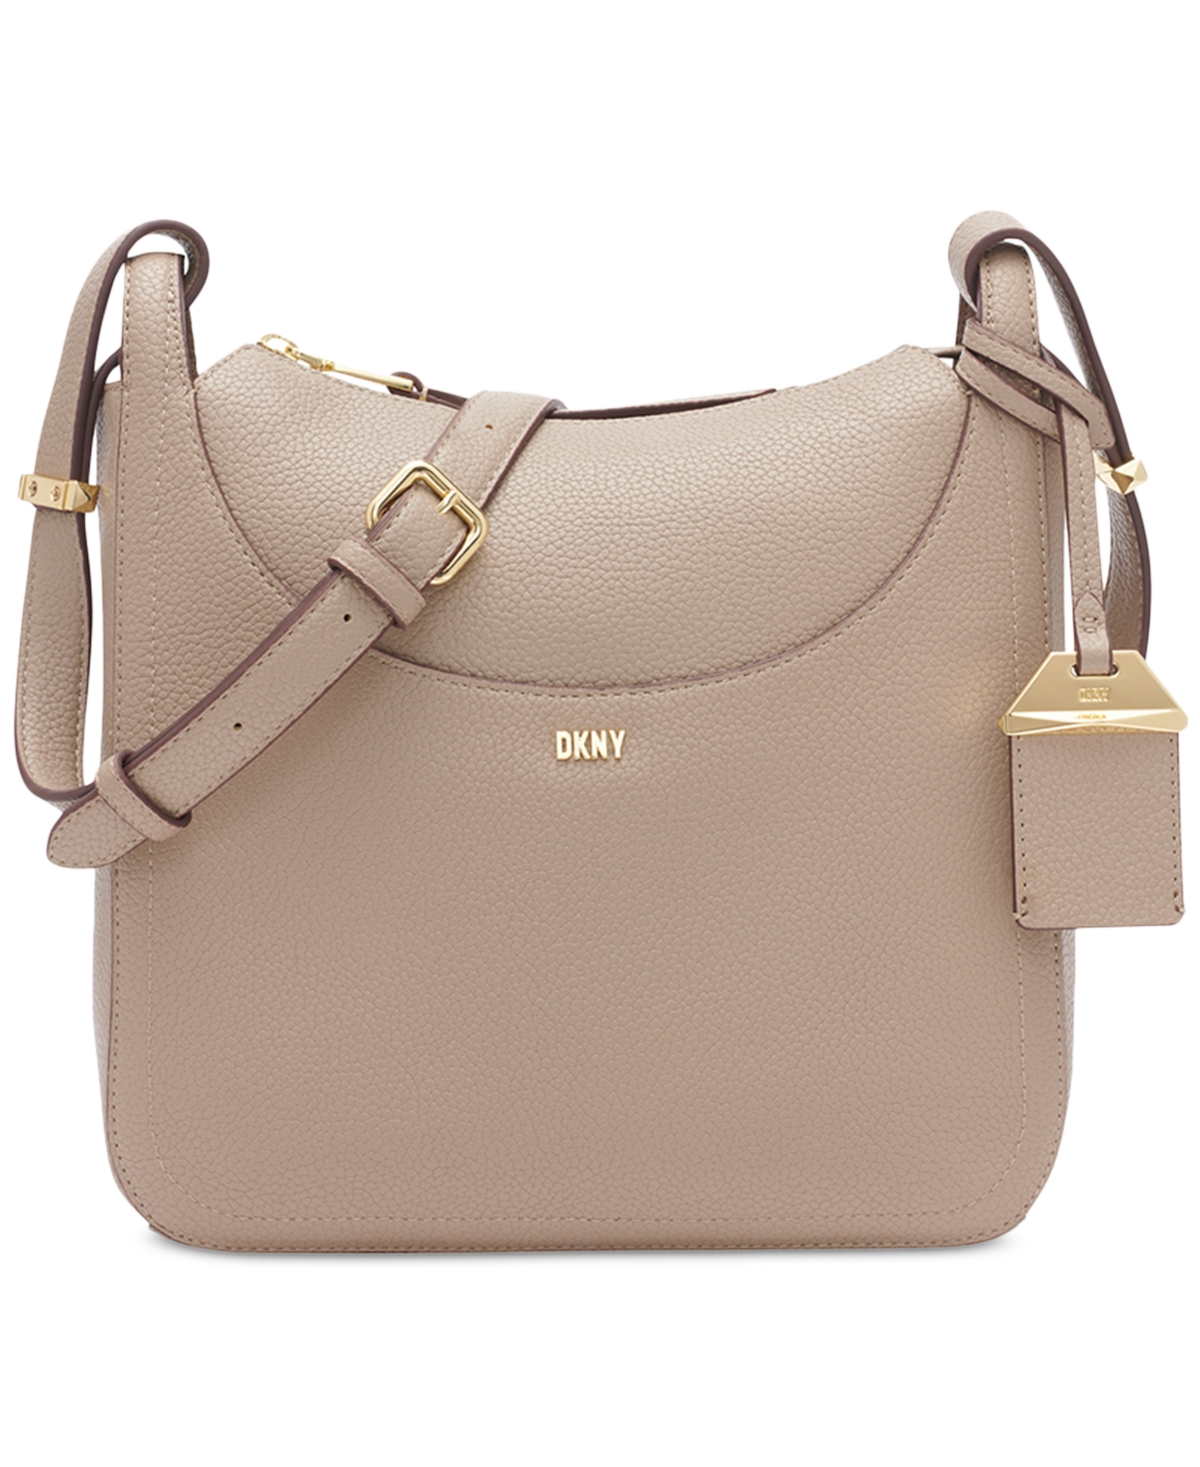 Dkny Barbara Small Zip Top Messenger In Toffee